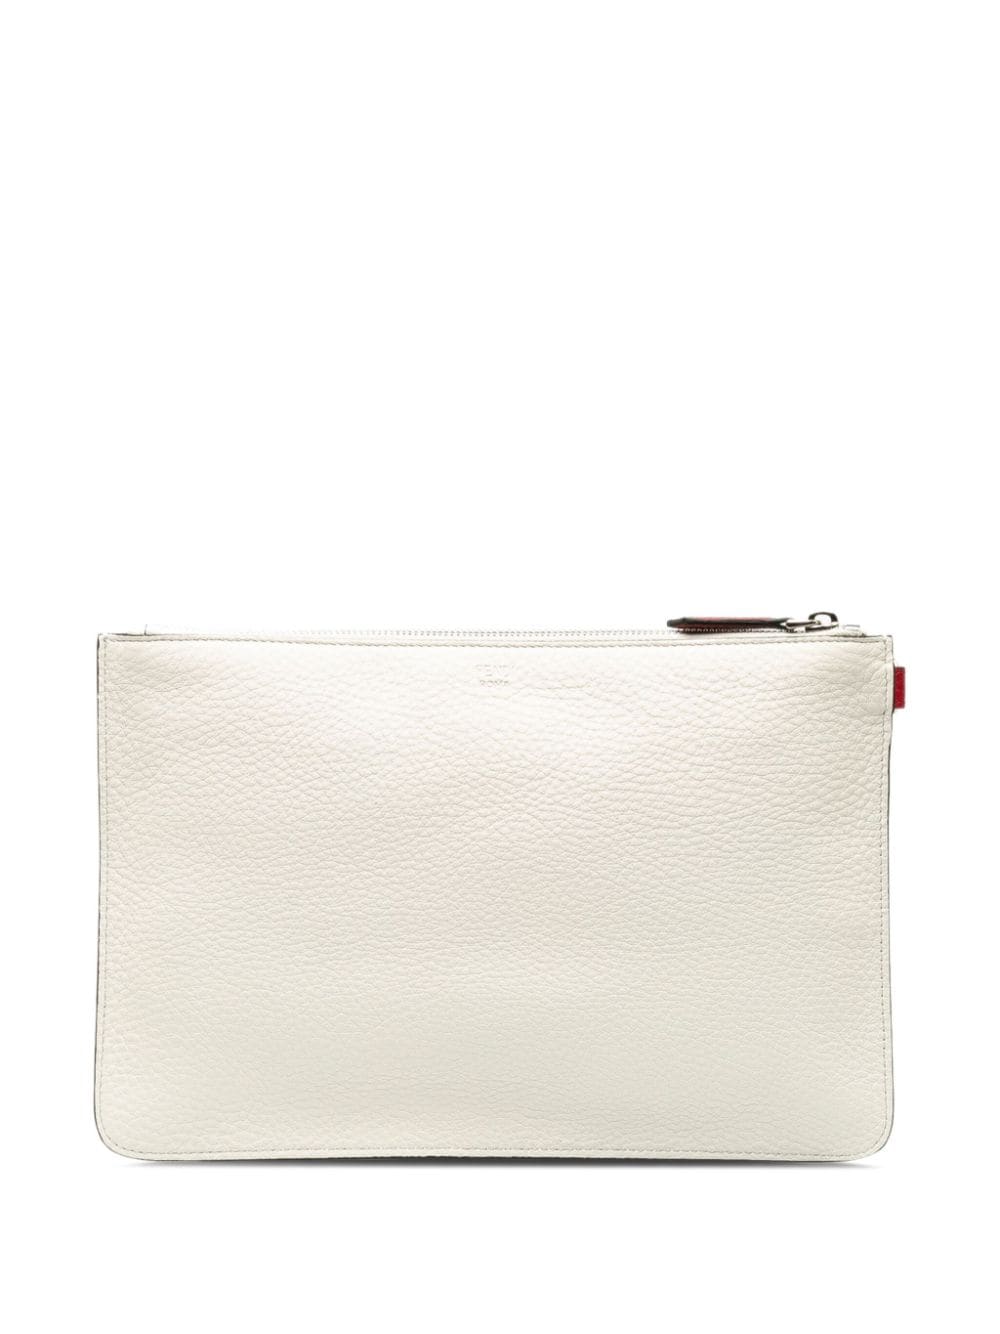 Pre-owned Fendi 2010-2023 Playing Cards Zipped Clutch Bag In White